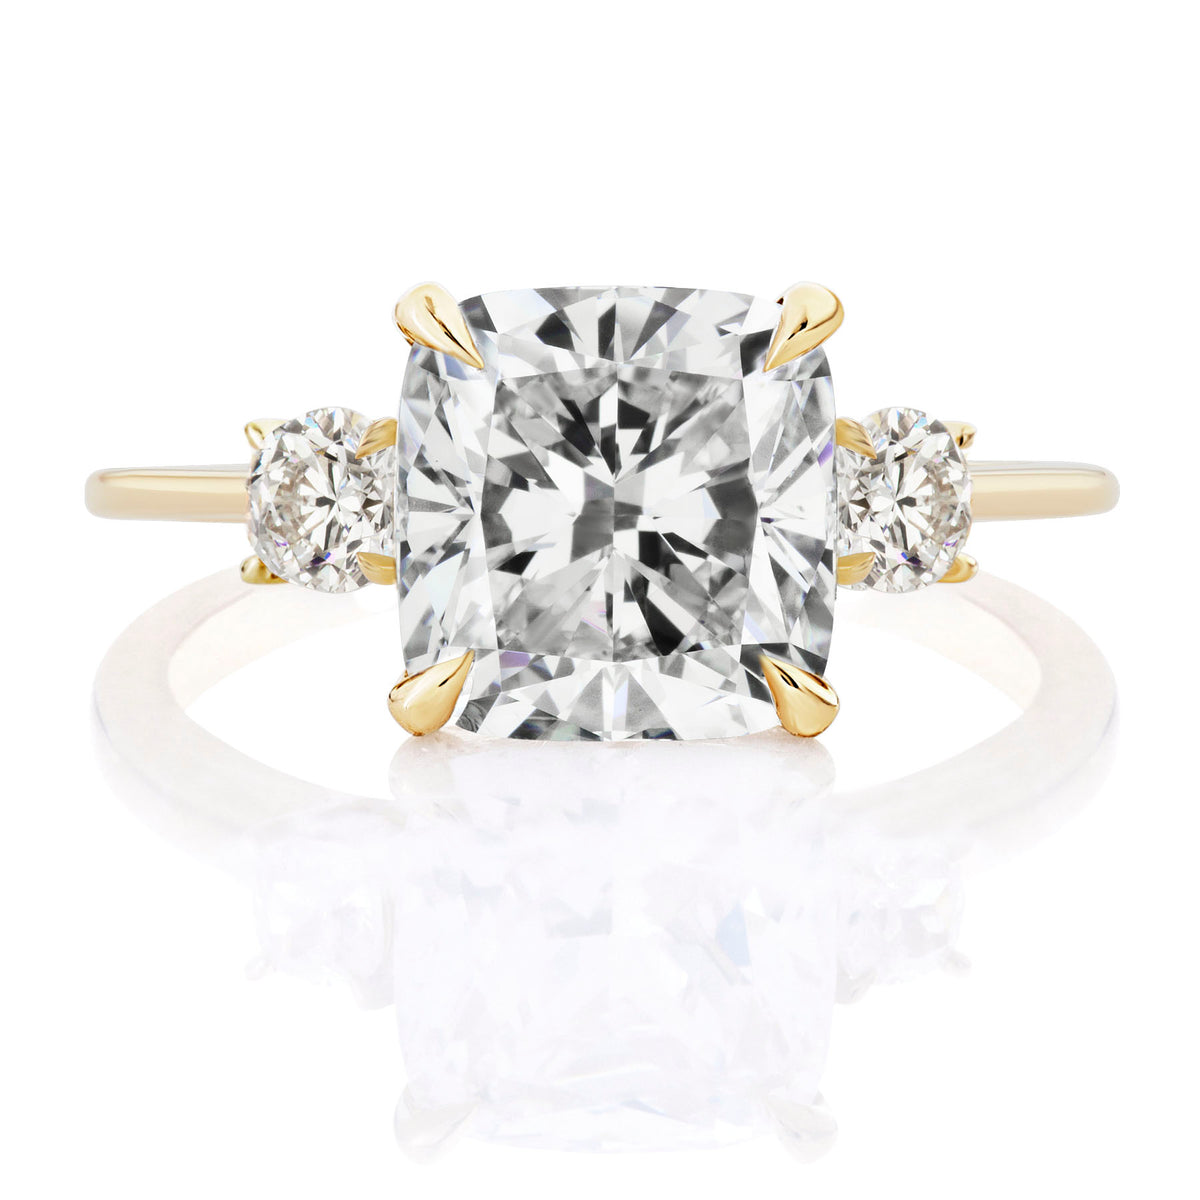 Cushion Cut Diamond Engagement Ring with Round Side Stones